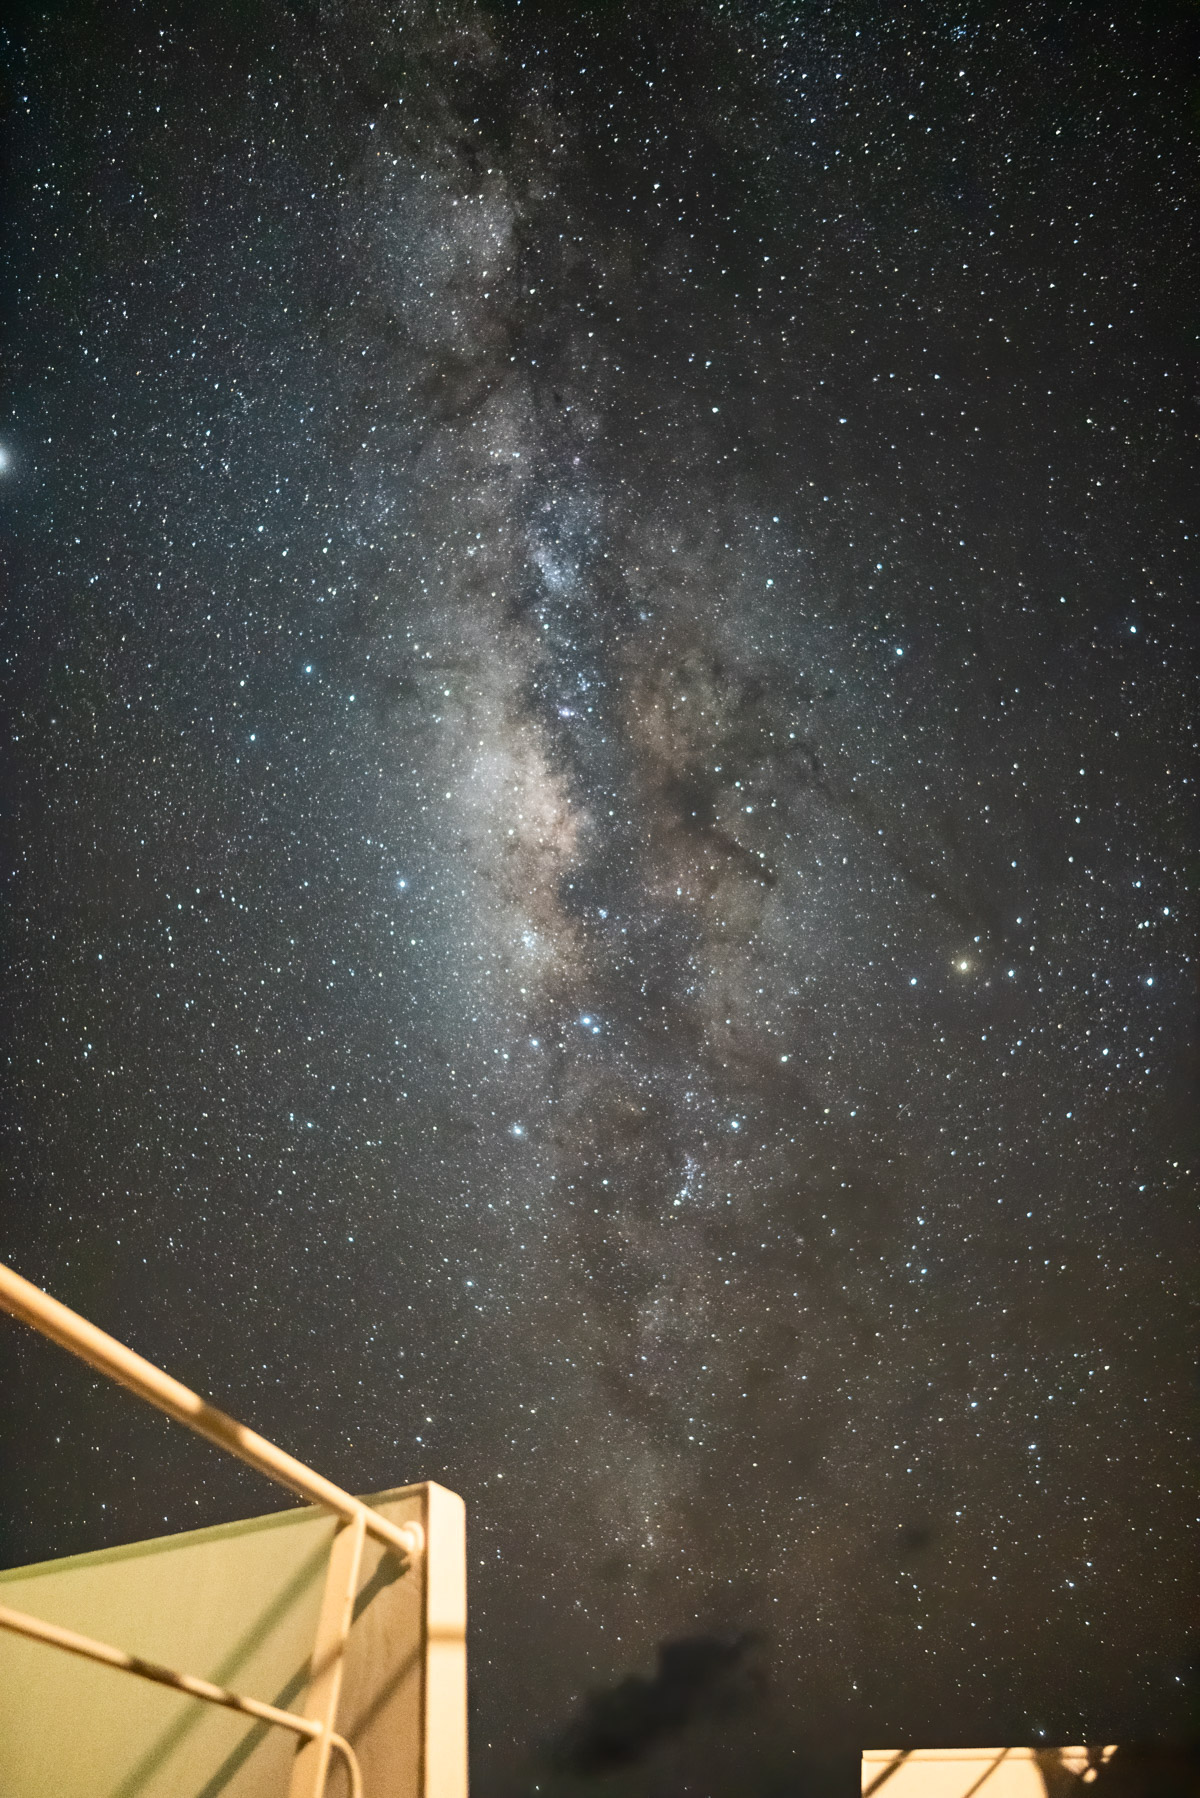 Milky Way from a Cargo Ship by Santiago Olay